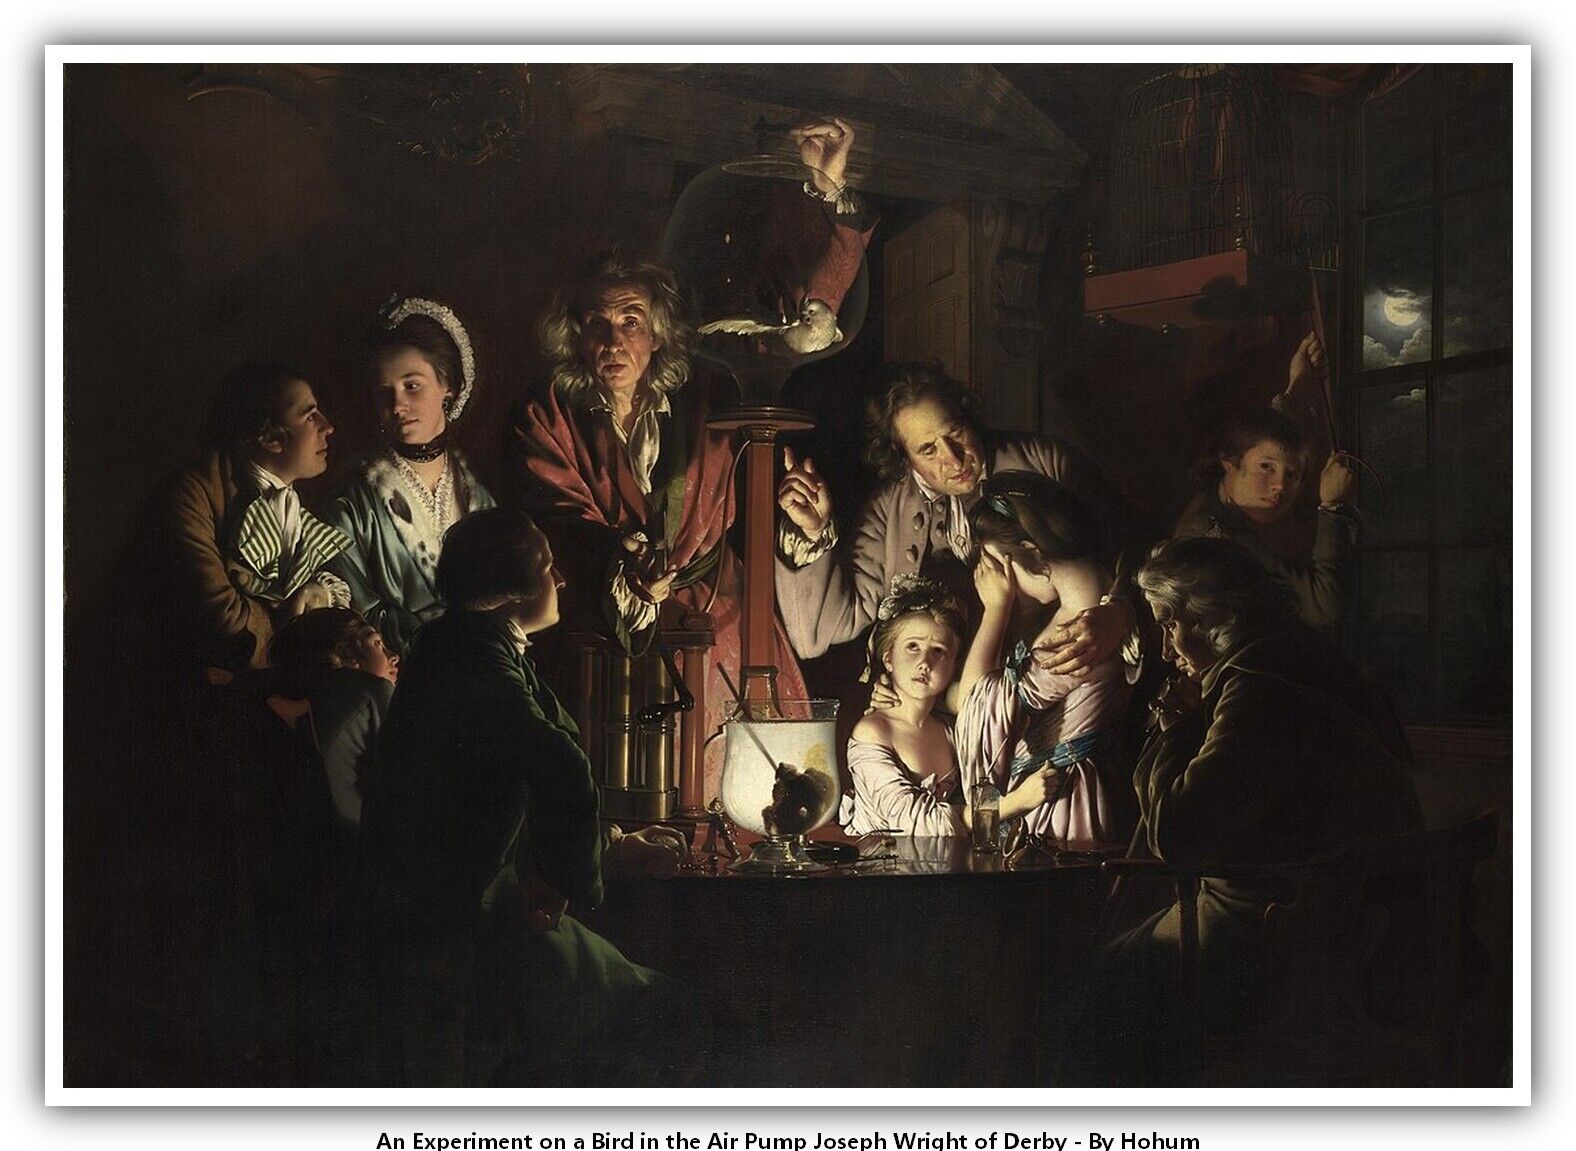 An Experiment on a Bird in the Air Pump Joseph Wright of Derby